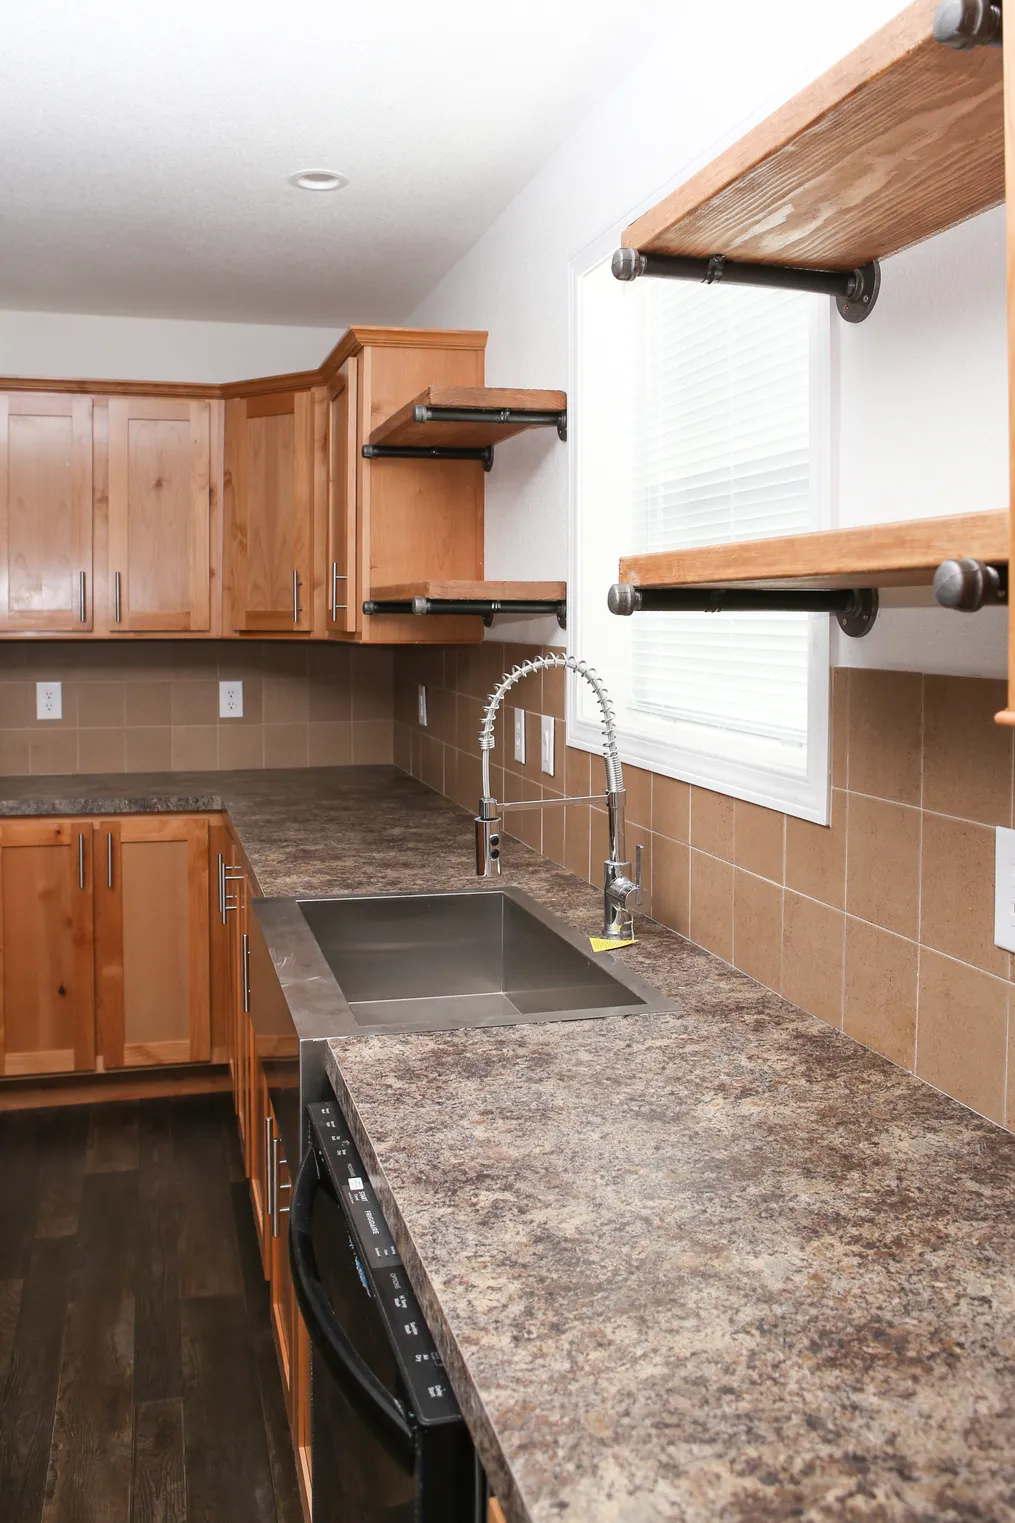 The INDIGO Kitchen. This Manufactured Mobile Home features 3 bedrooms and 2 baths.